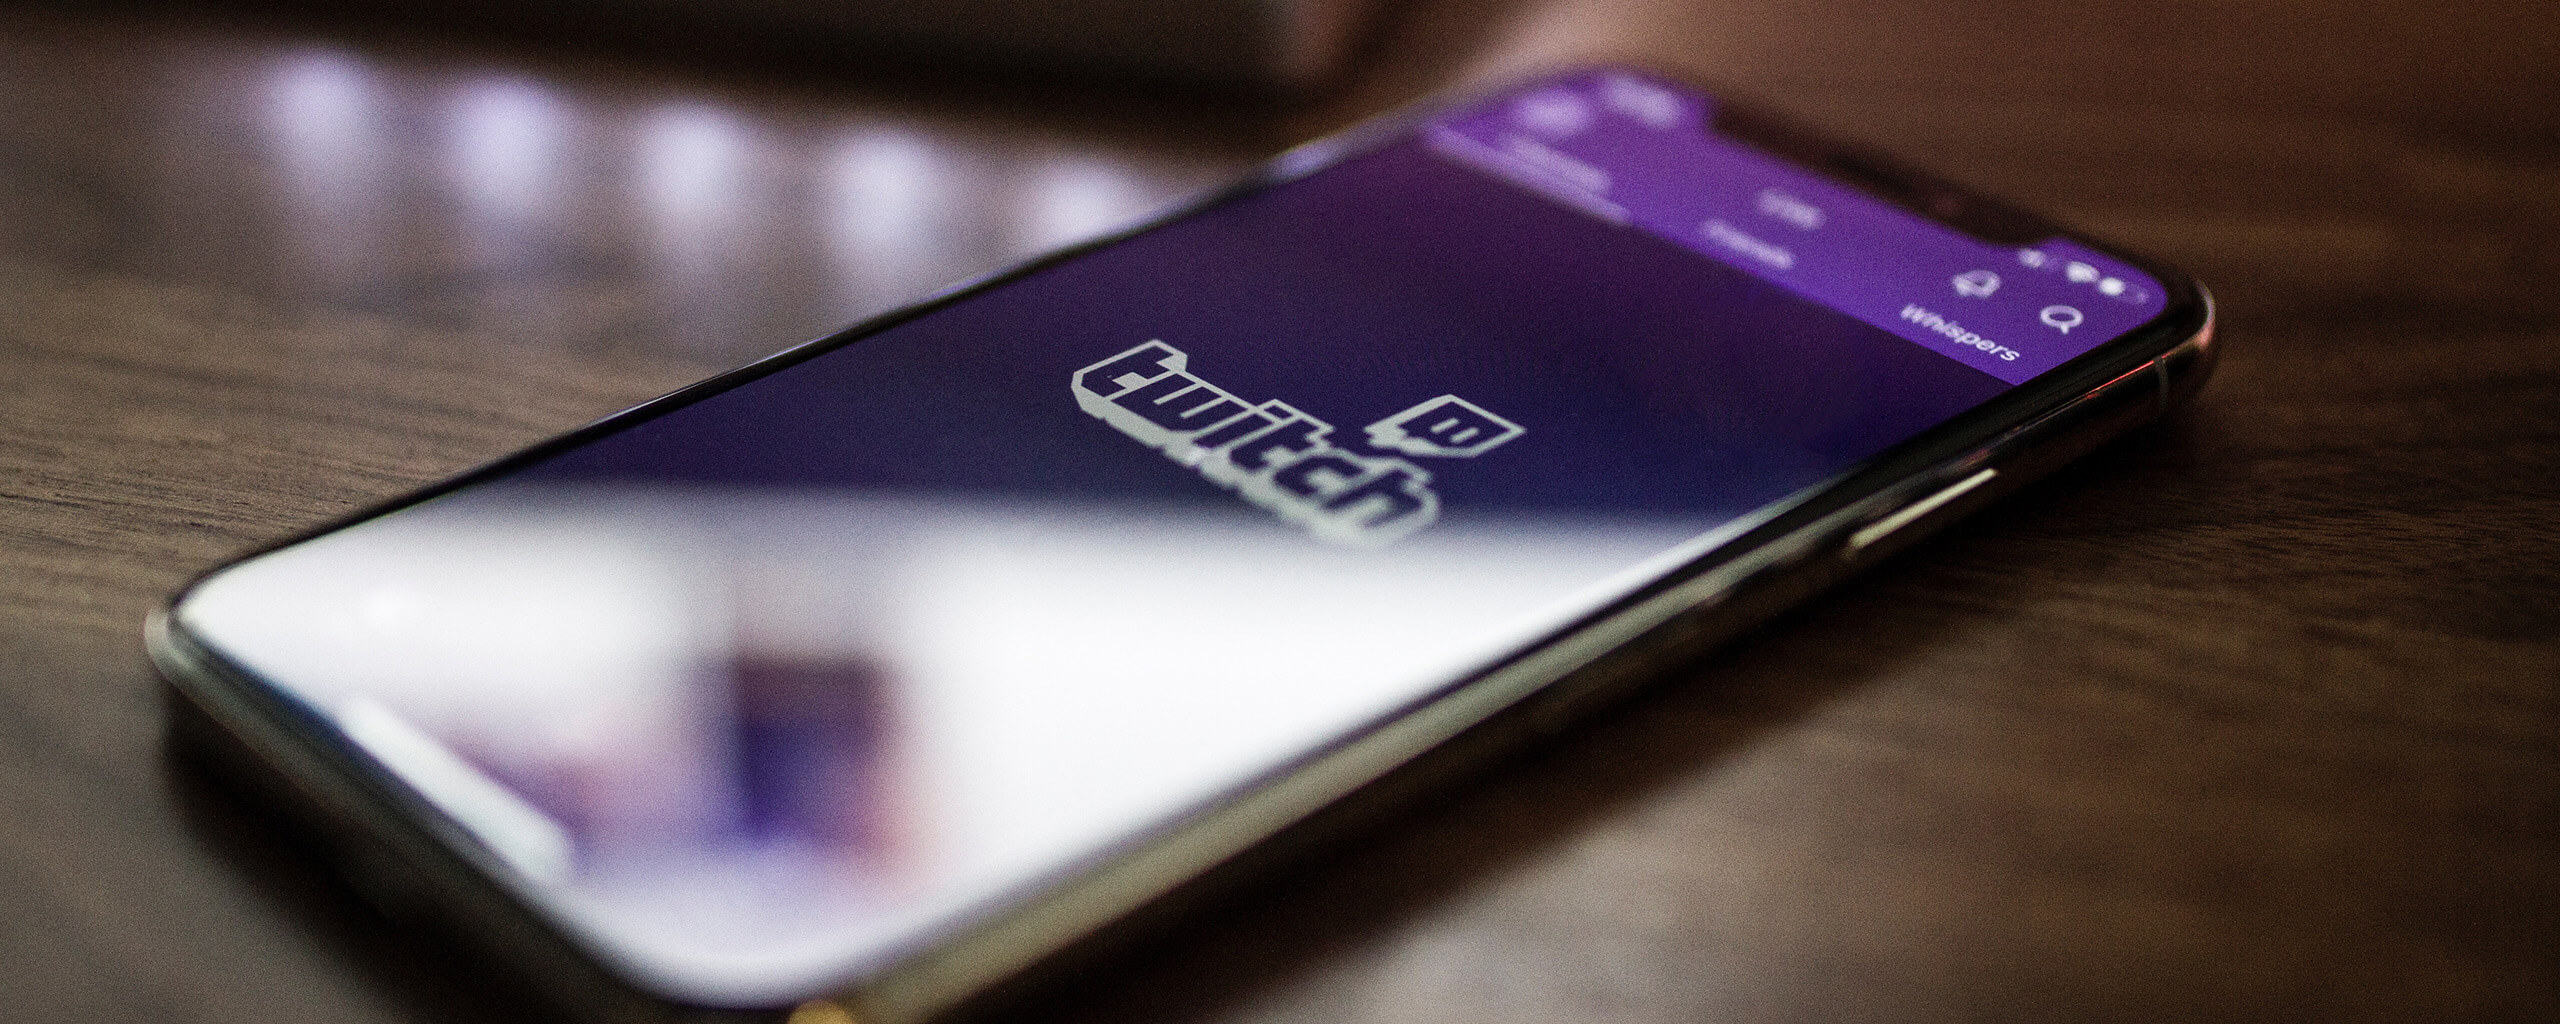 twitch app on a phone